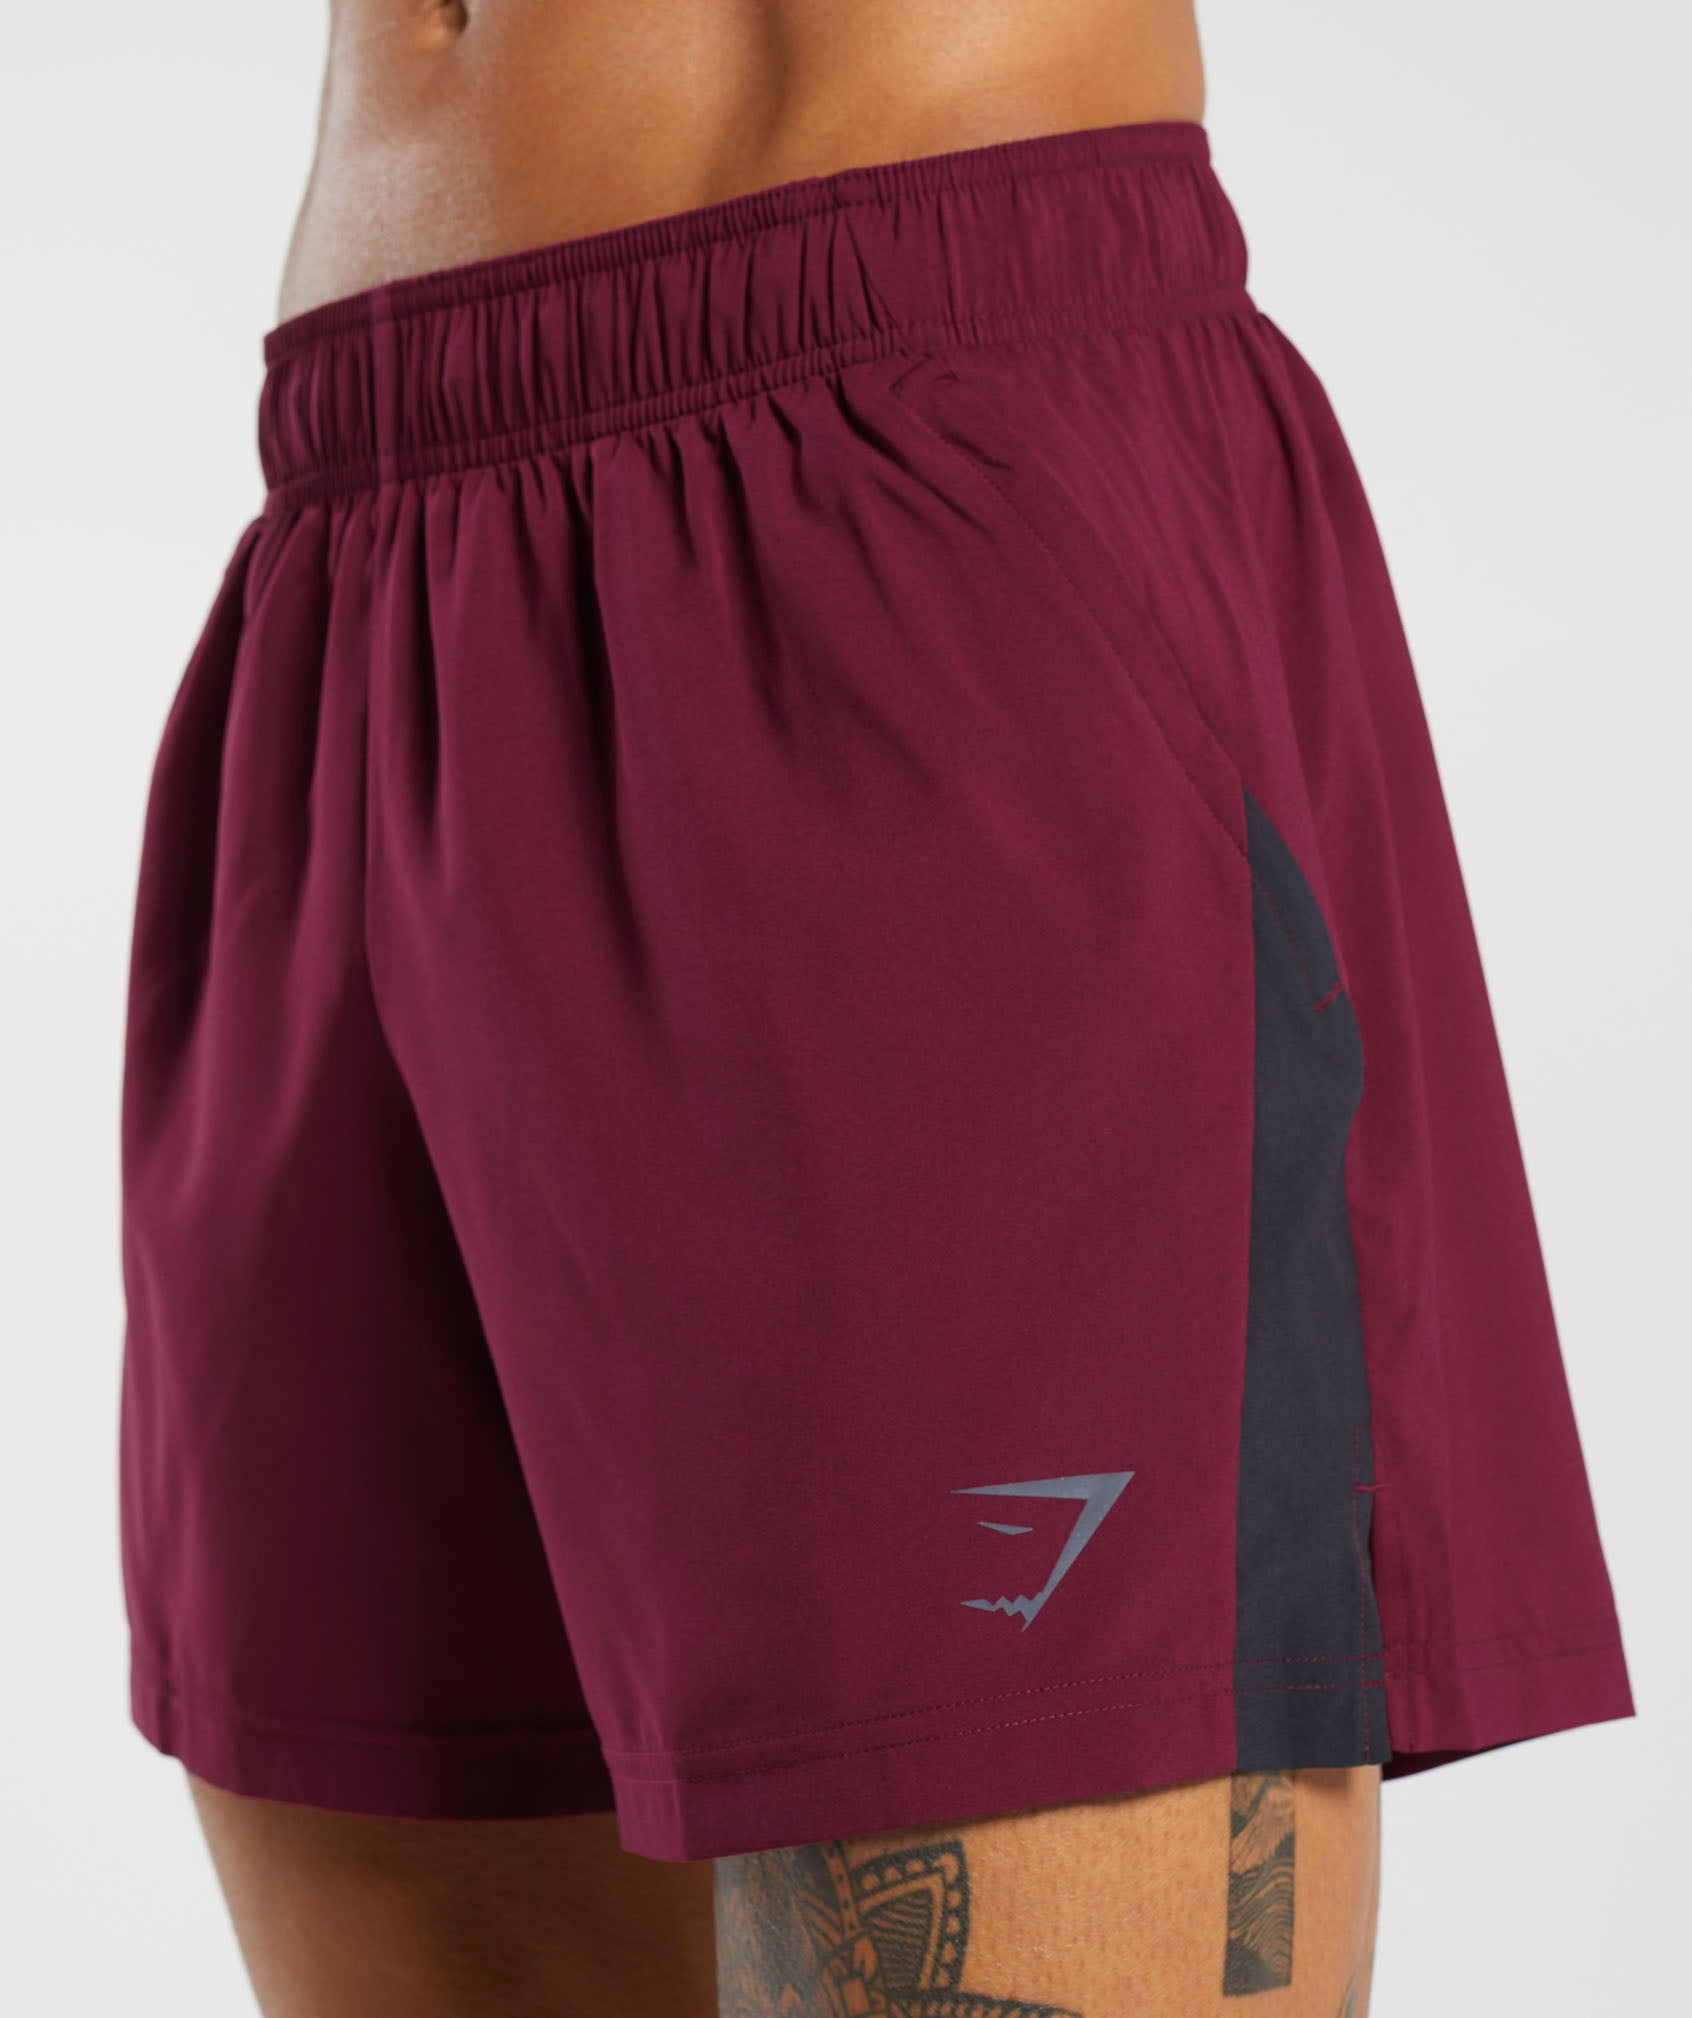 Sport 5" Shorts in Plum Pink/Black - view 6